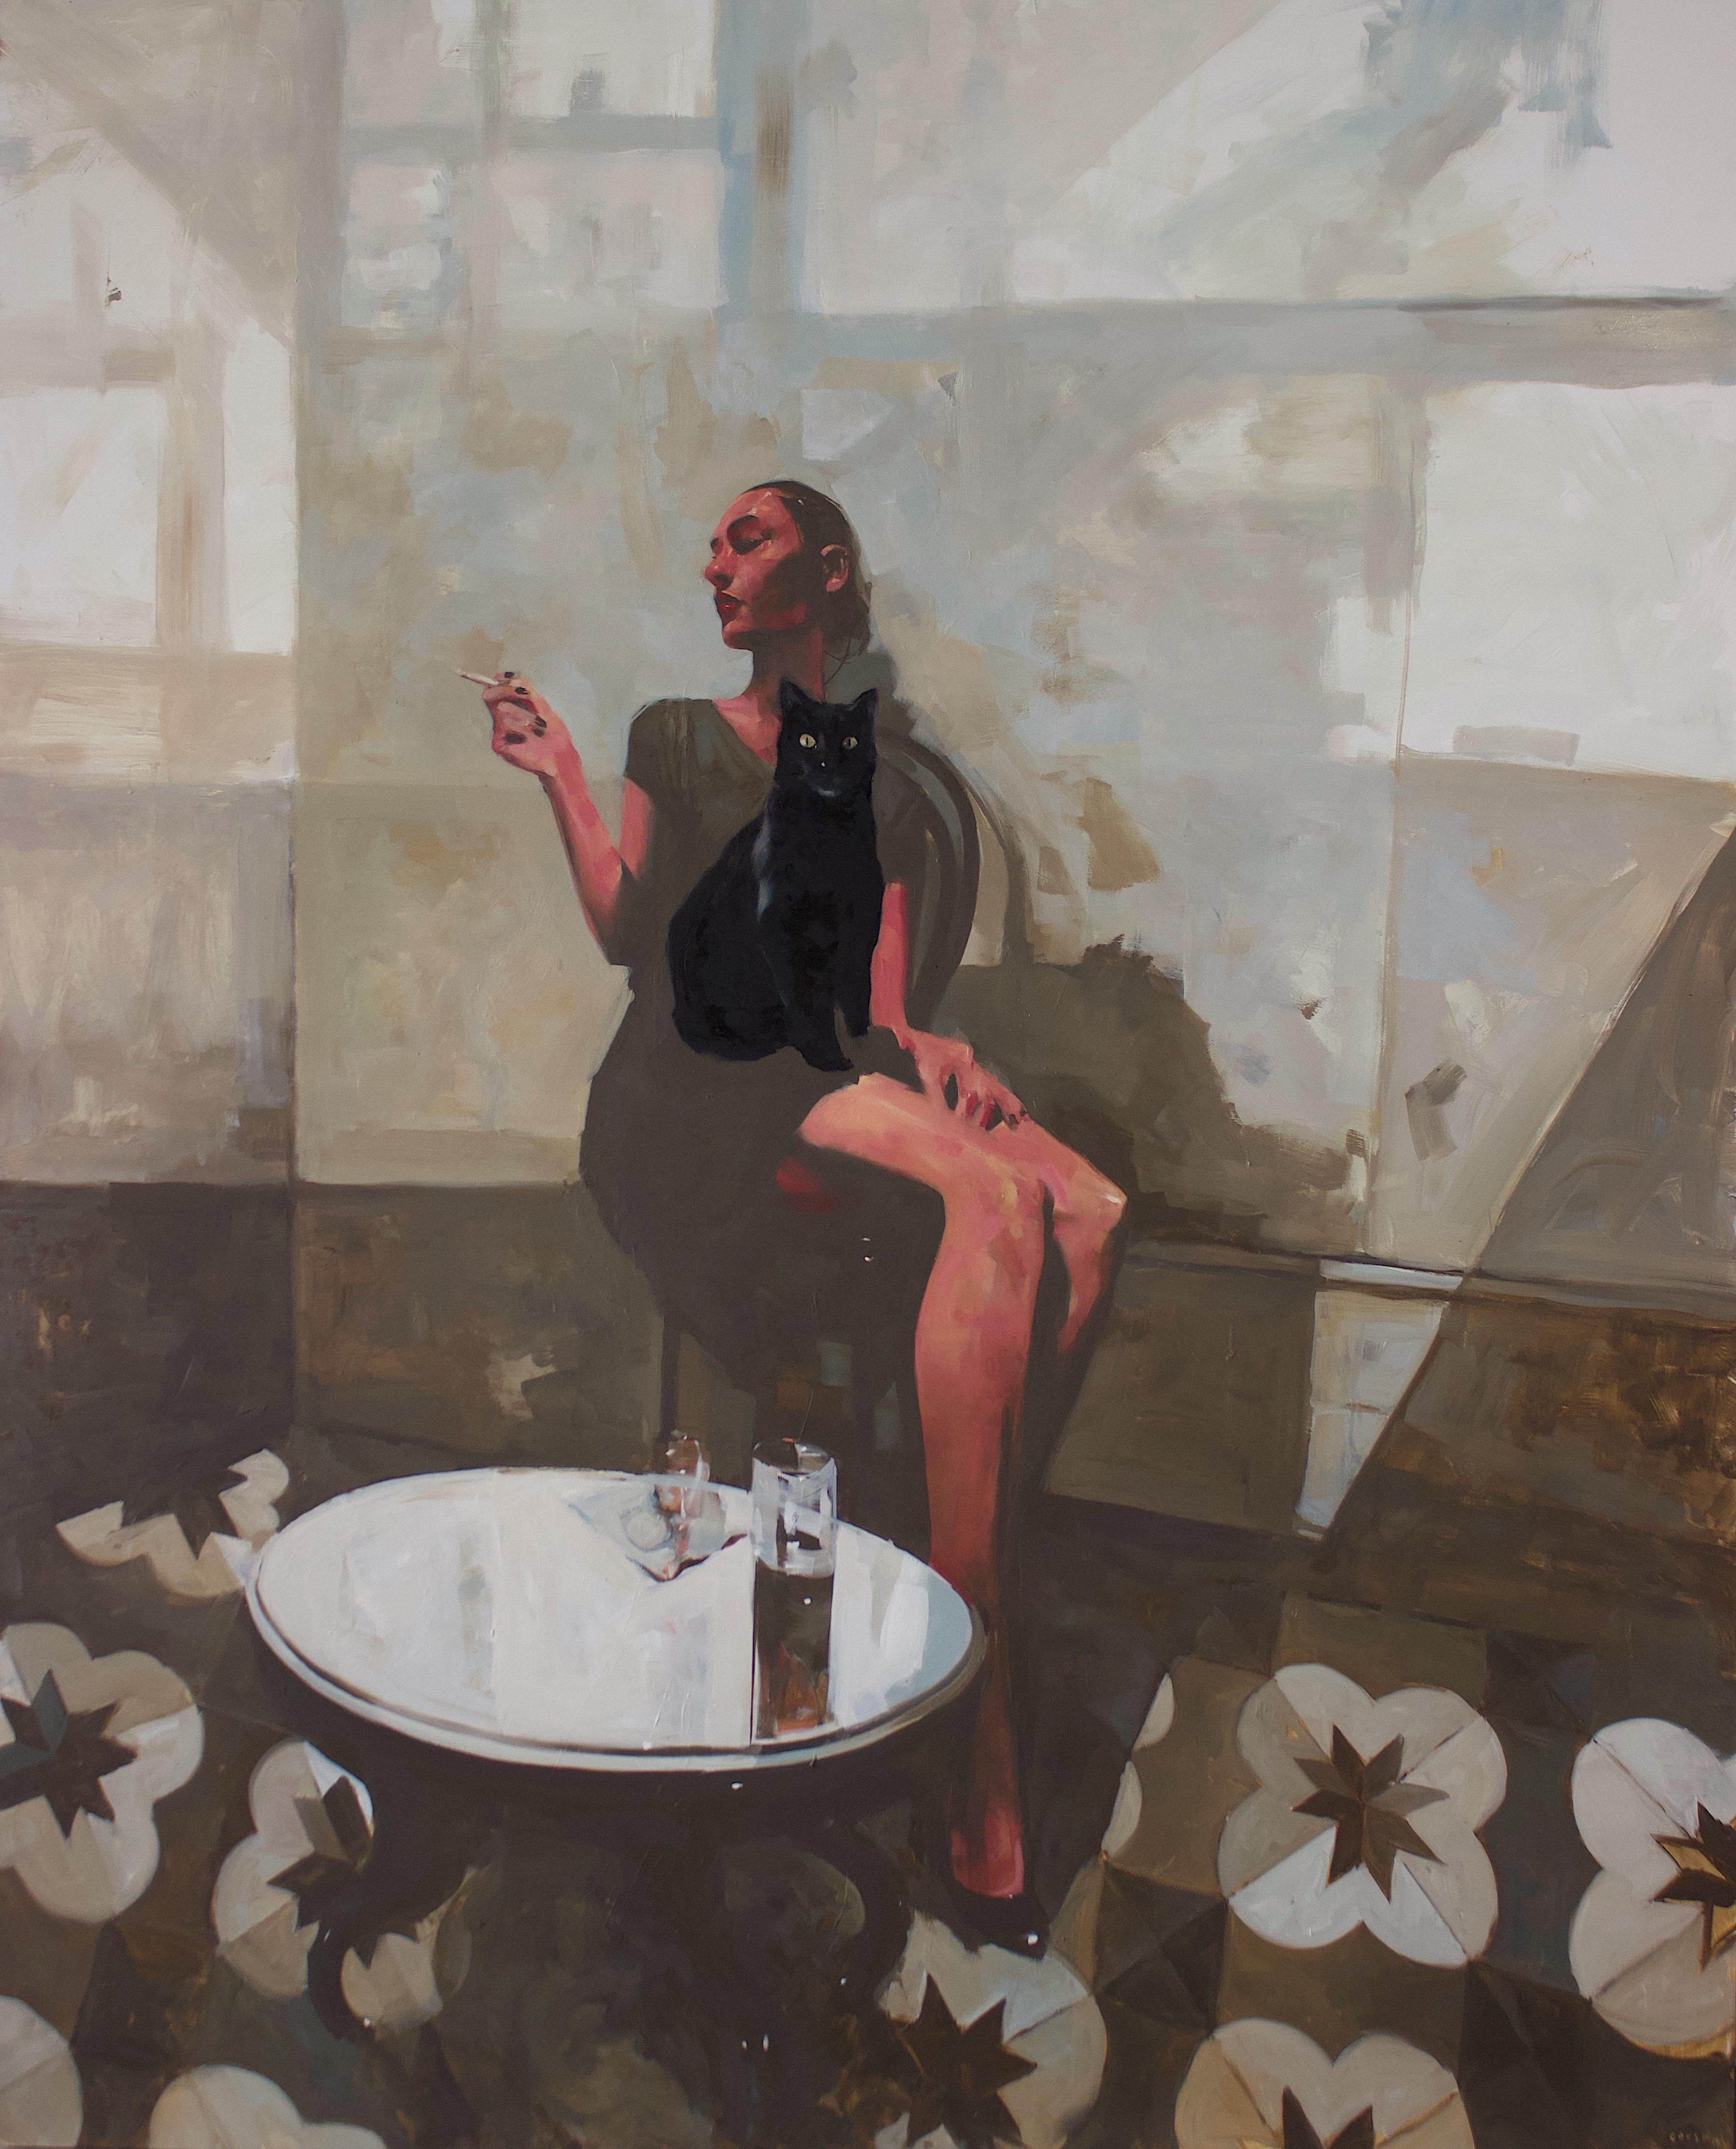 Michael Carson Figurative Painting - "Casting Spells at the Farish House"